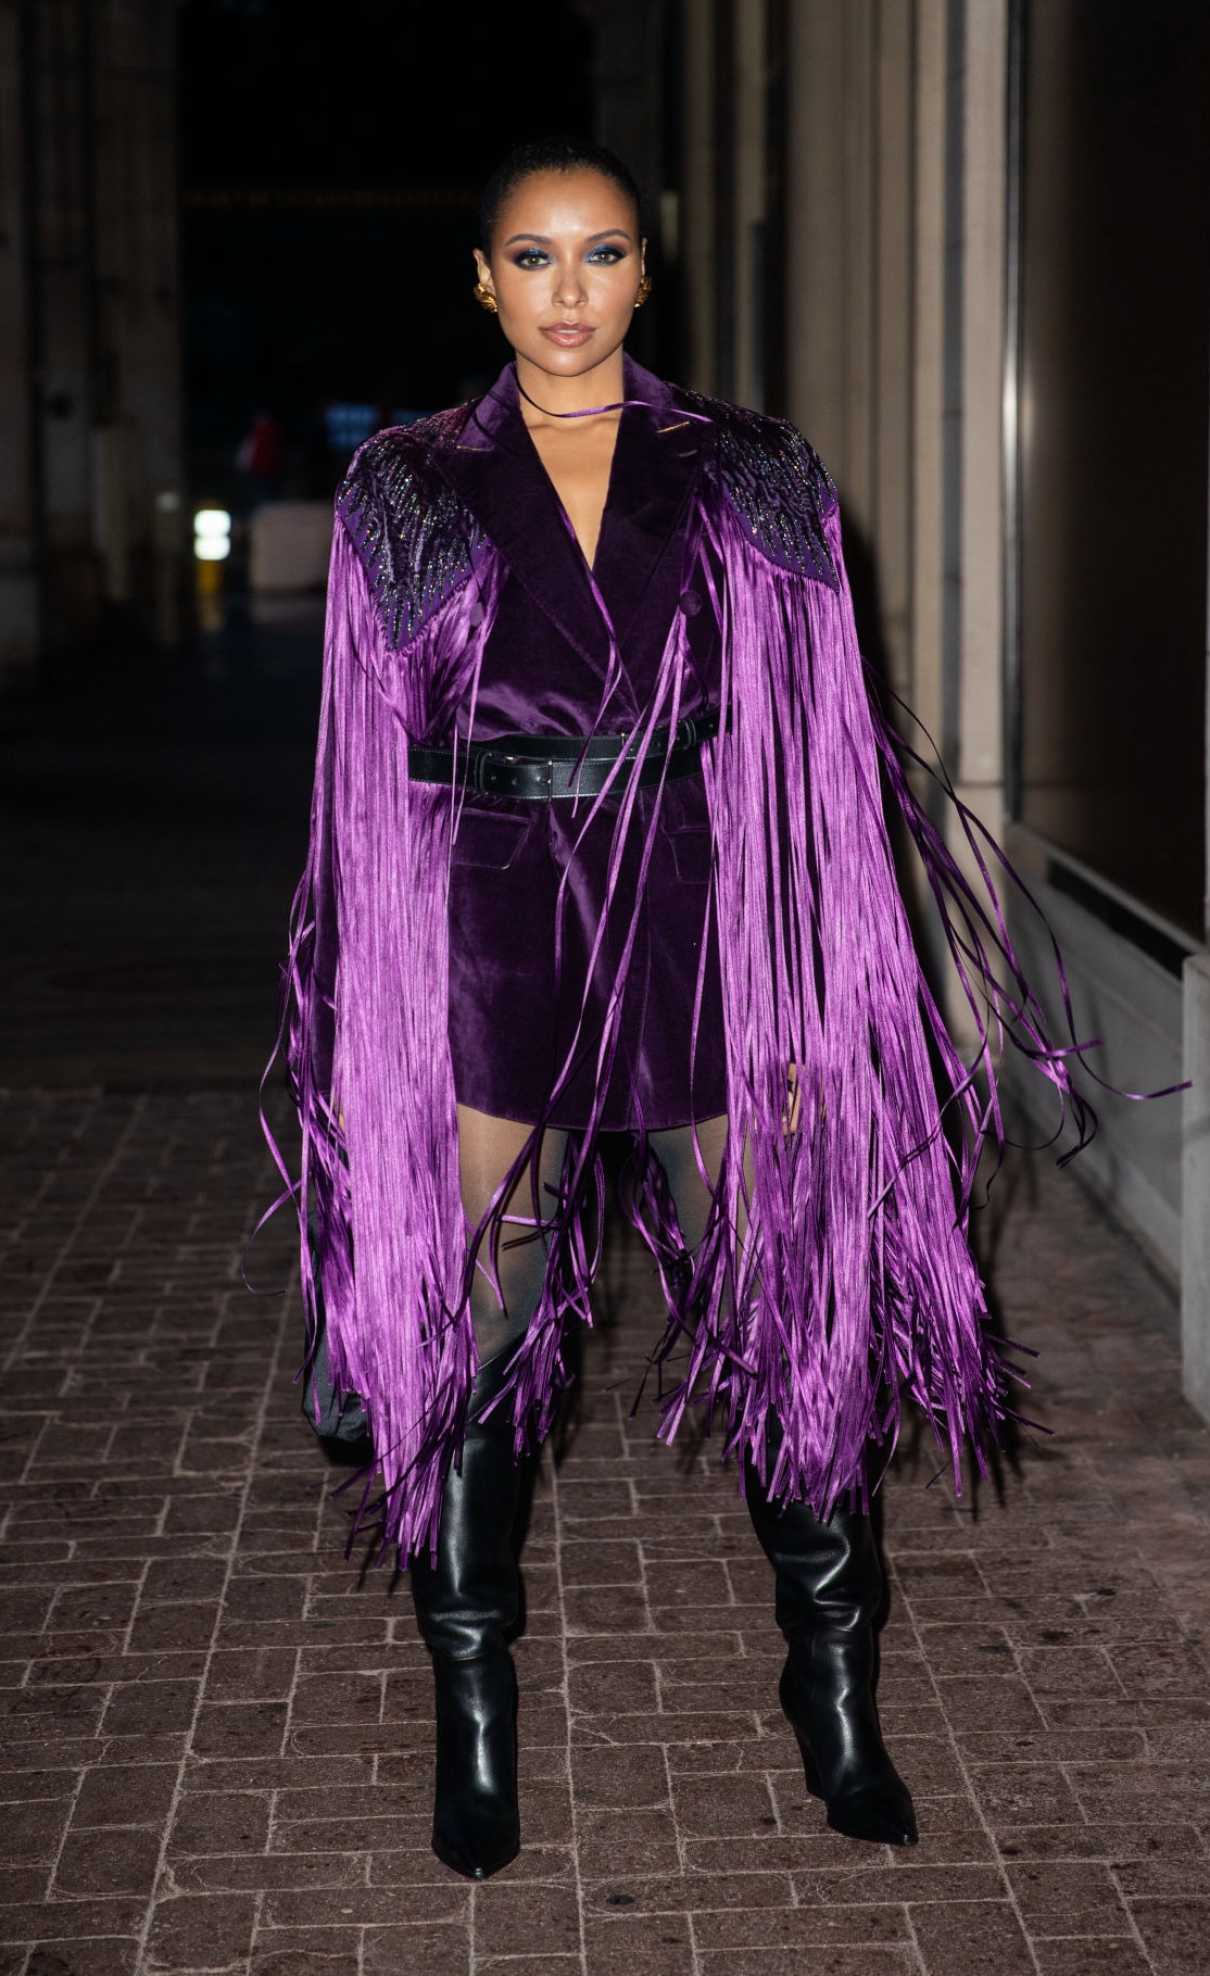 Kat Graham in a Purple Outfit